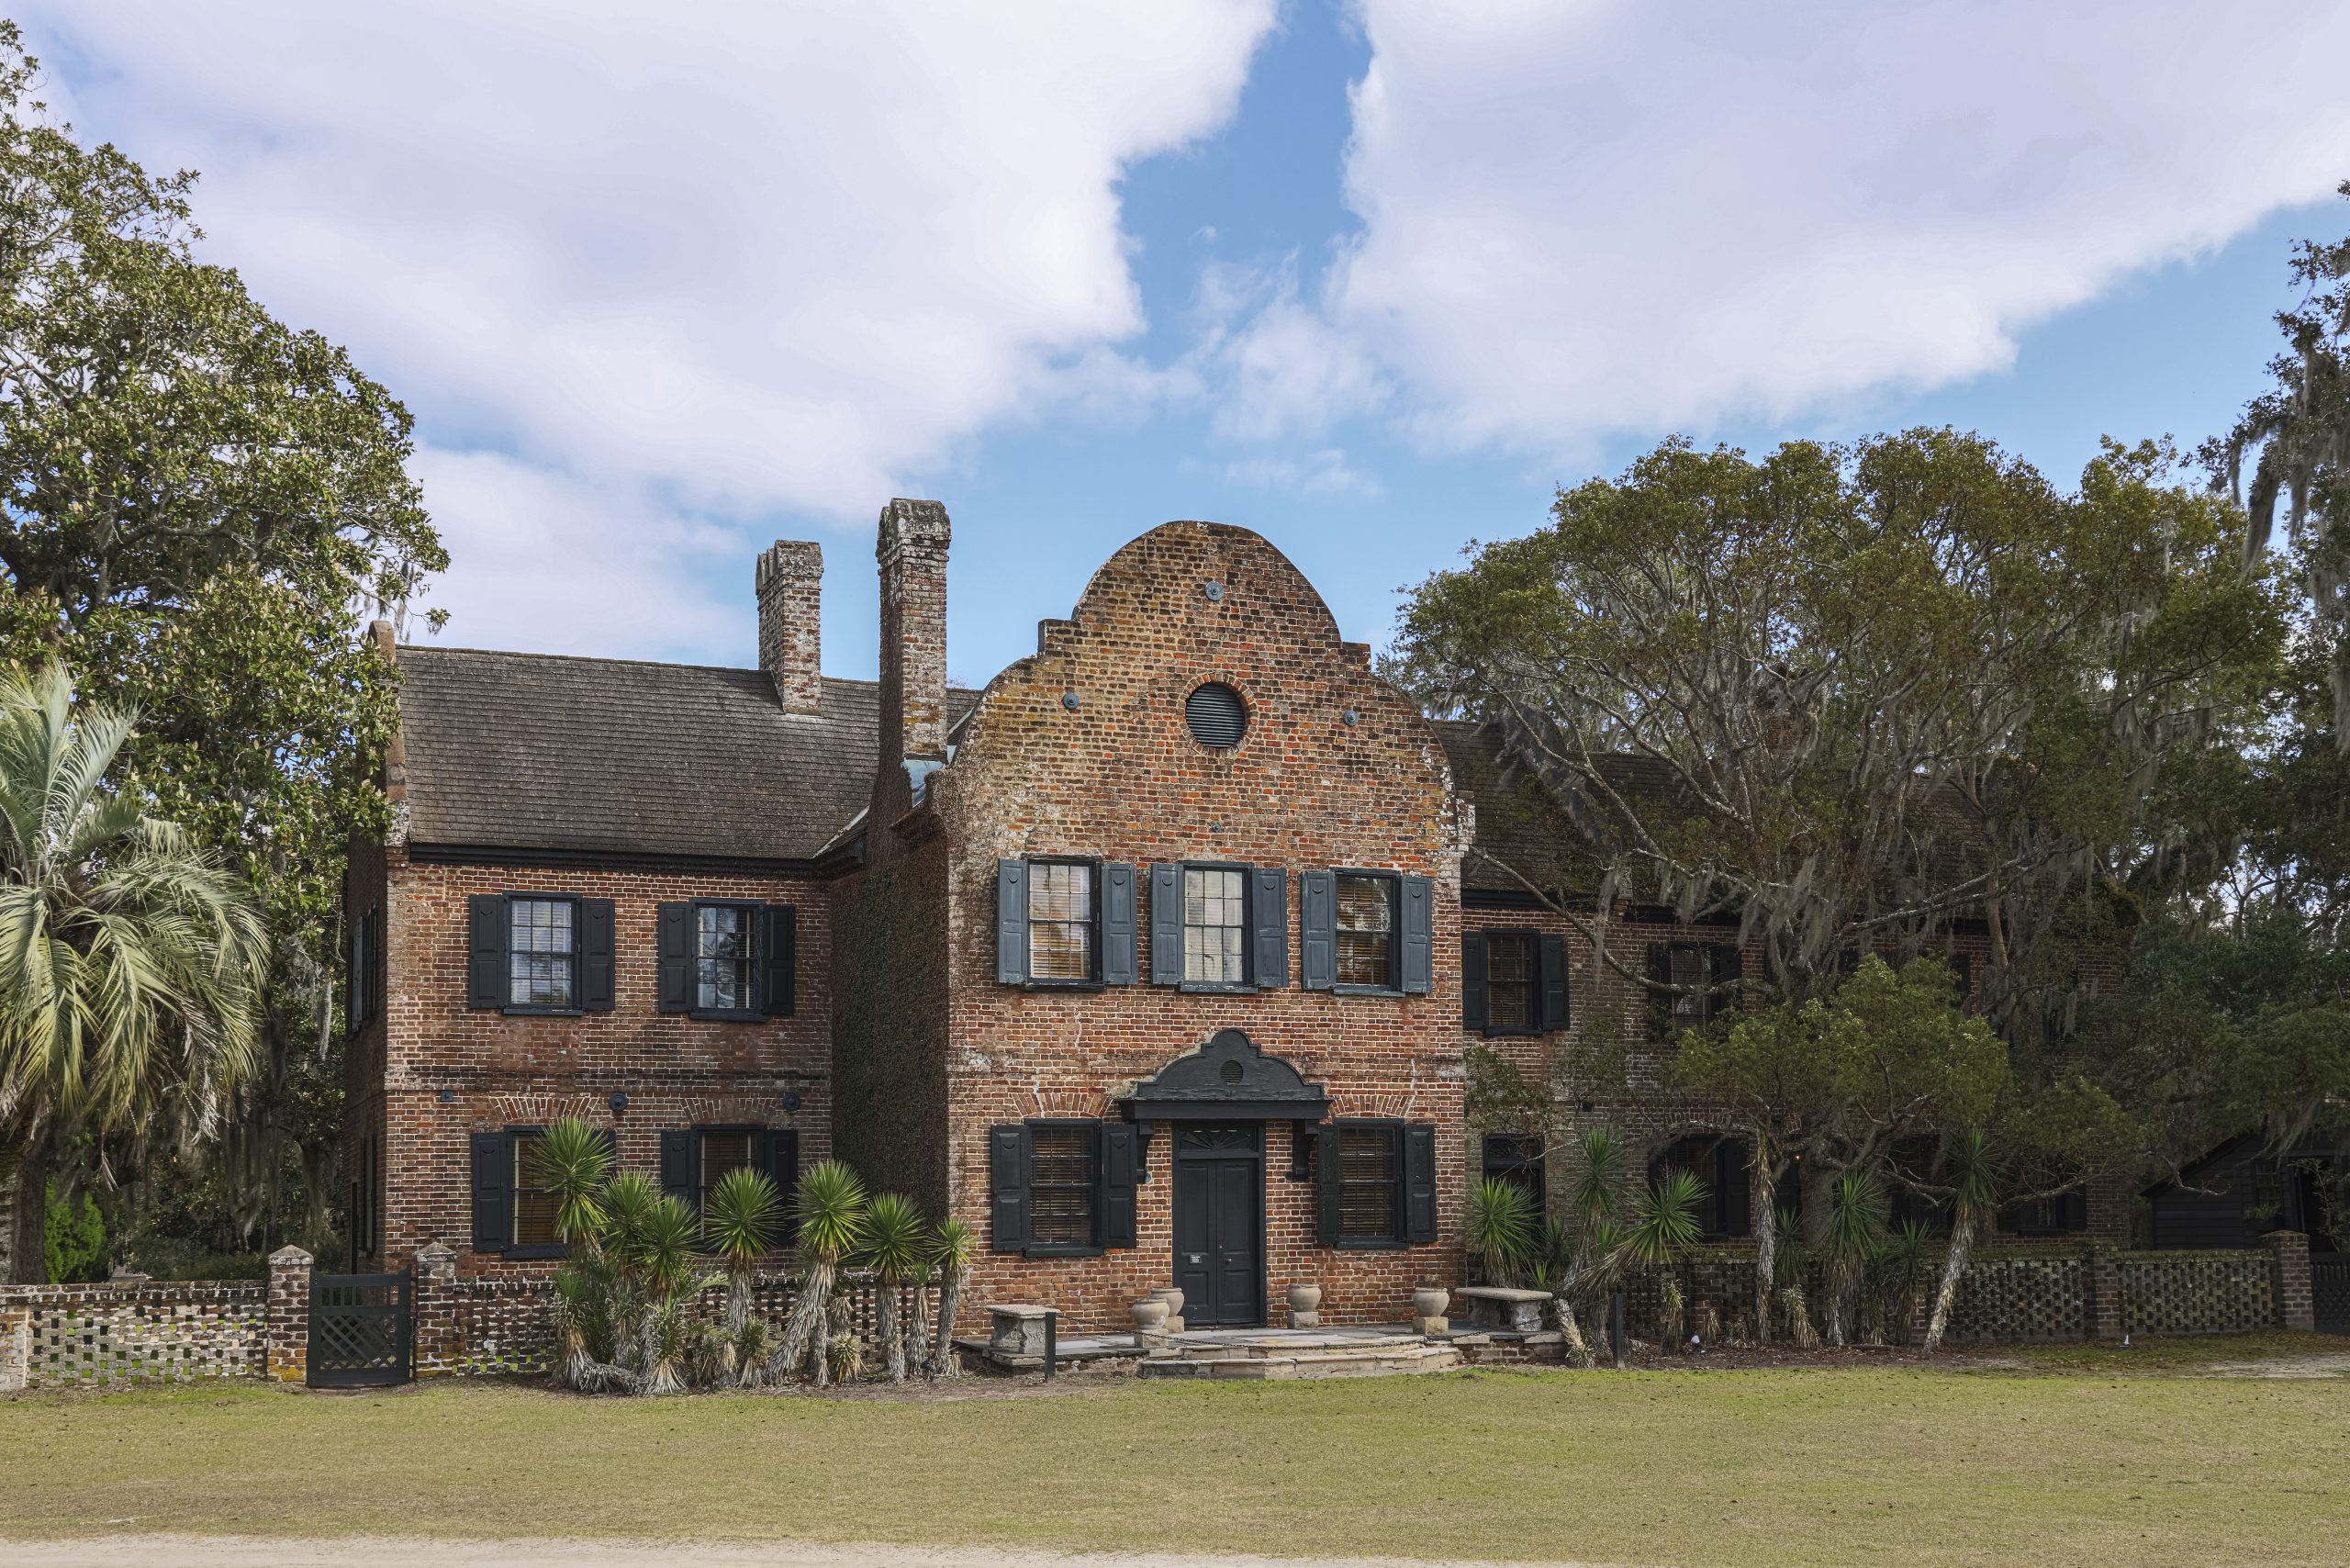 middleton place tour & lunch with transportation from charleston